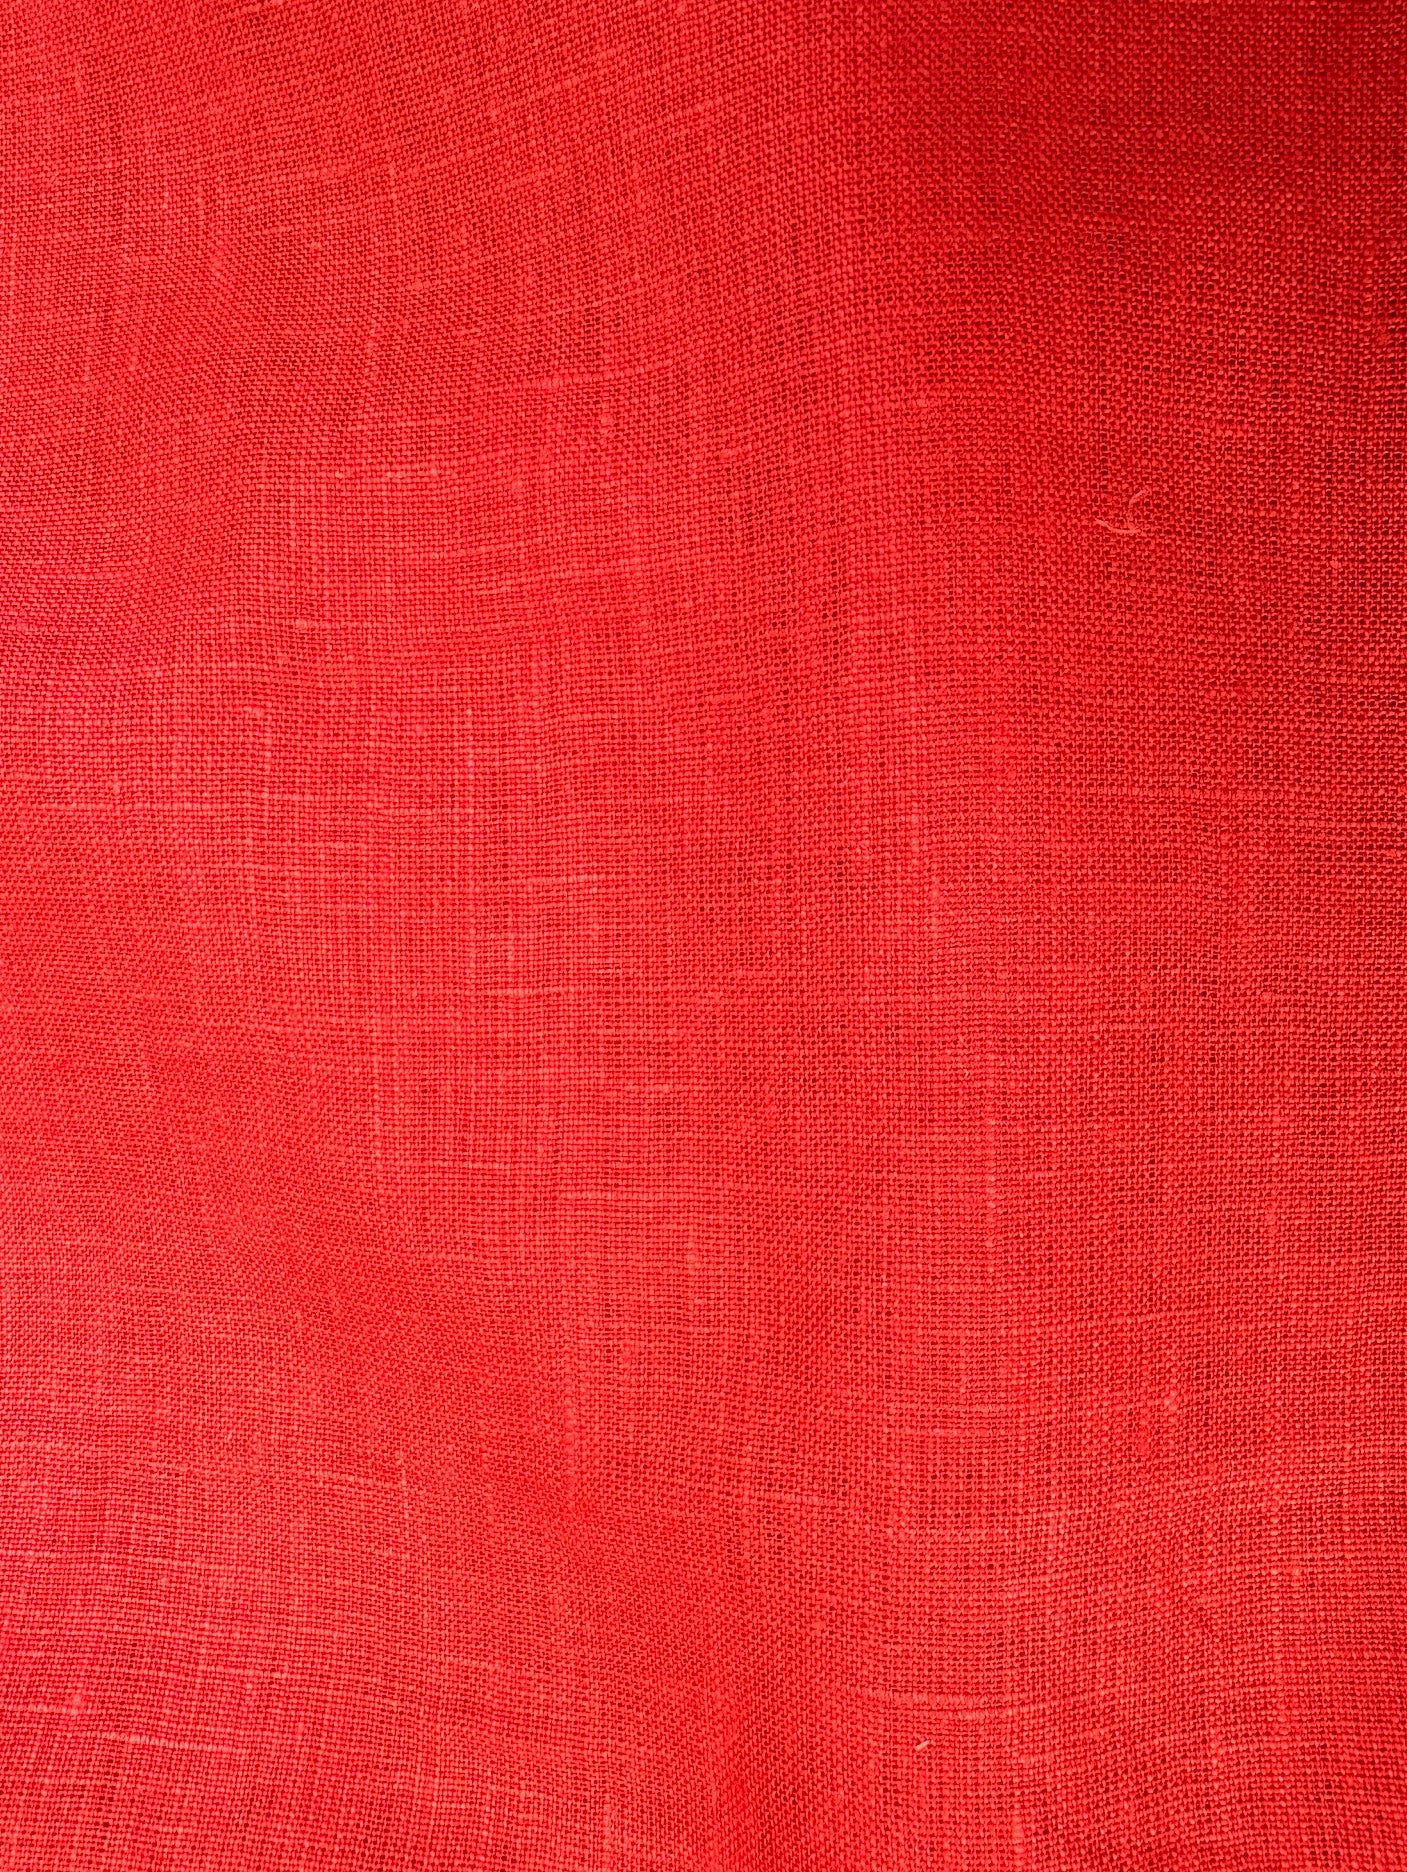 scarlet colored linen fabric